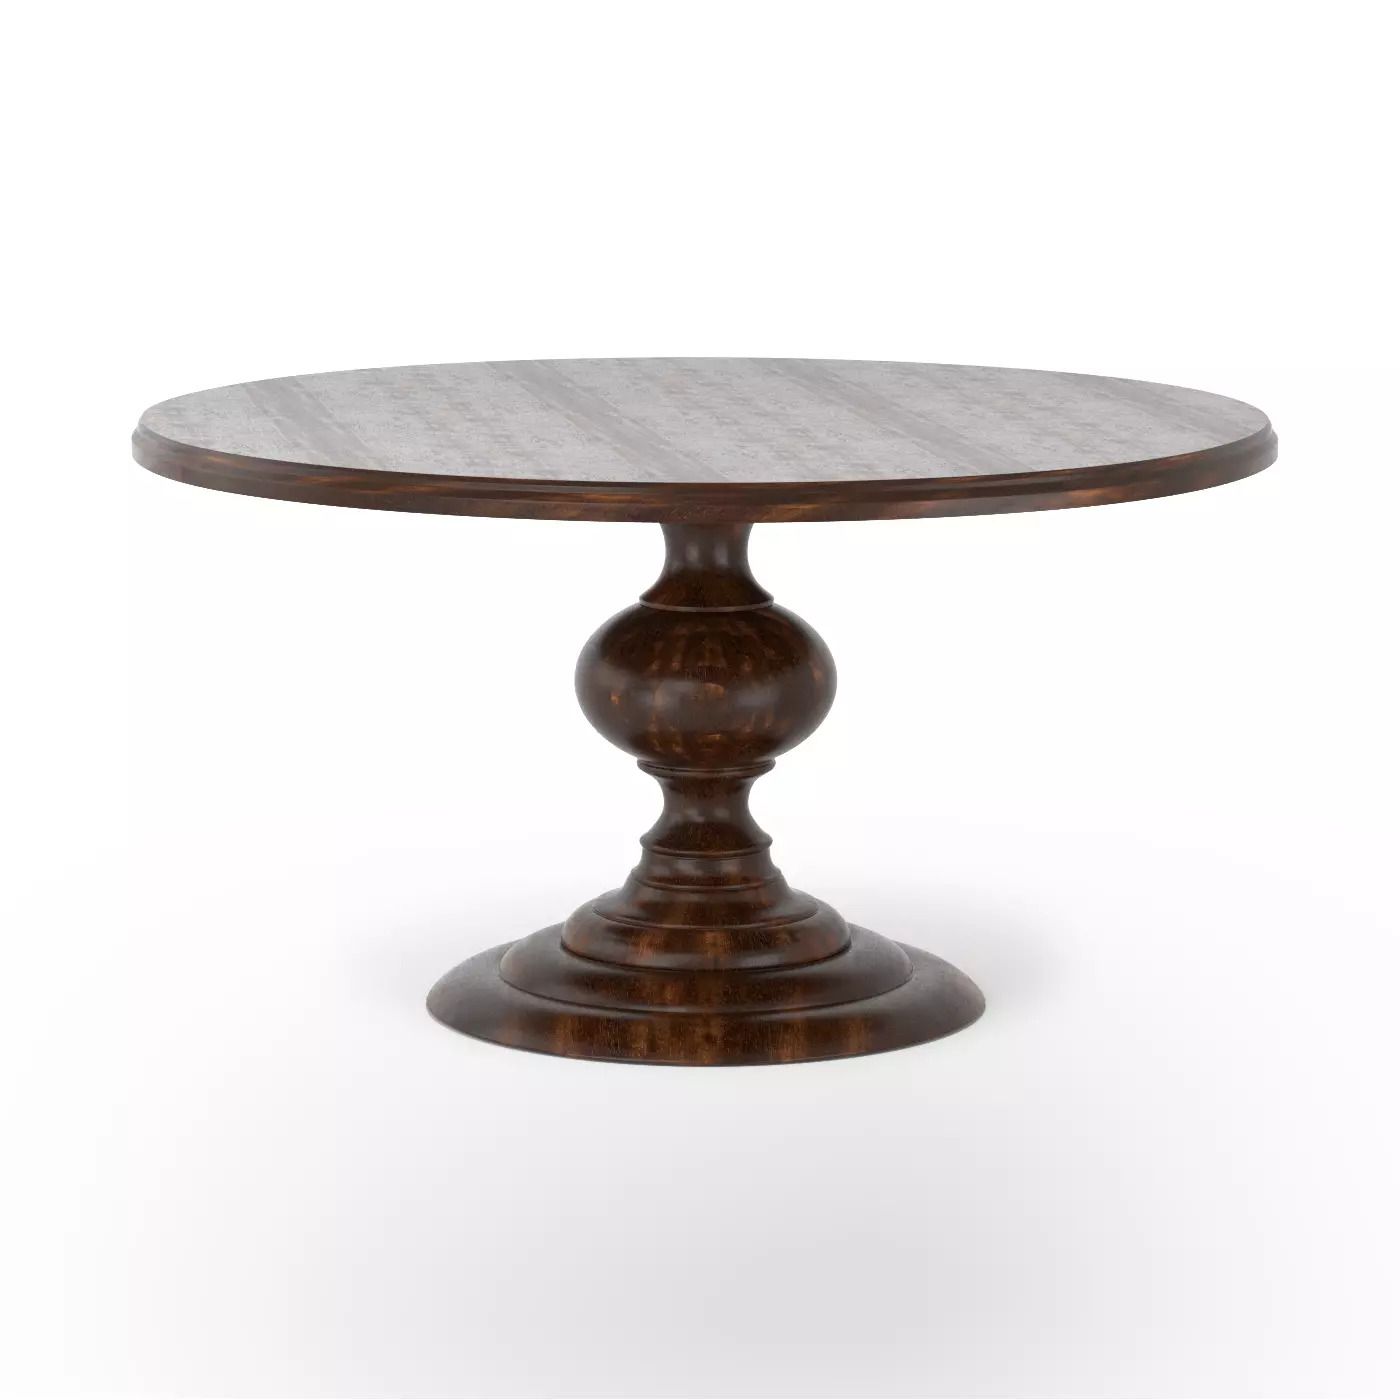 Magnolia Round Dining Table | Scout & Nimble